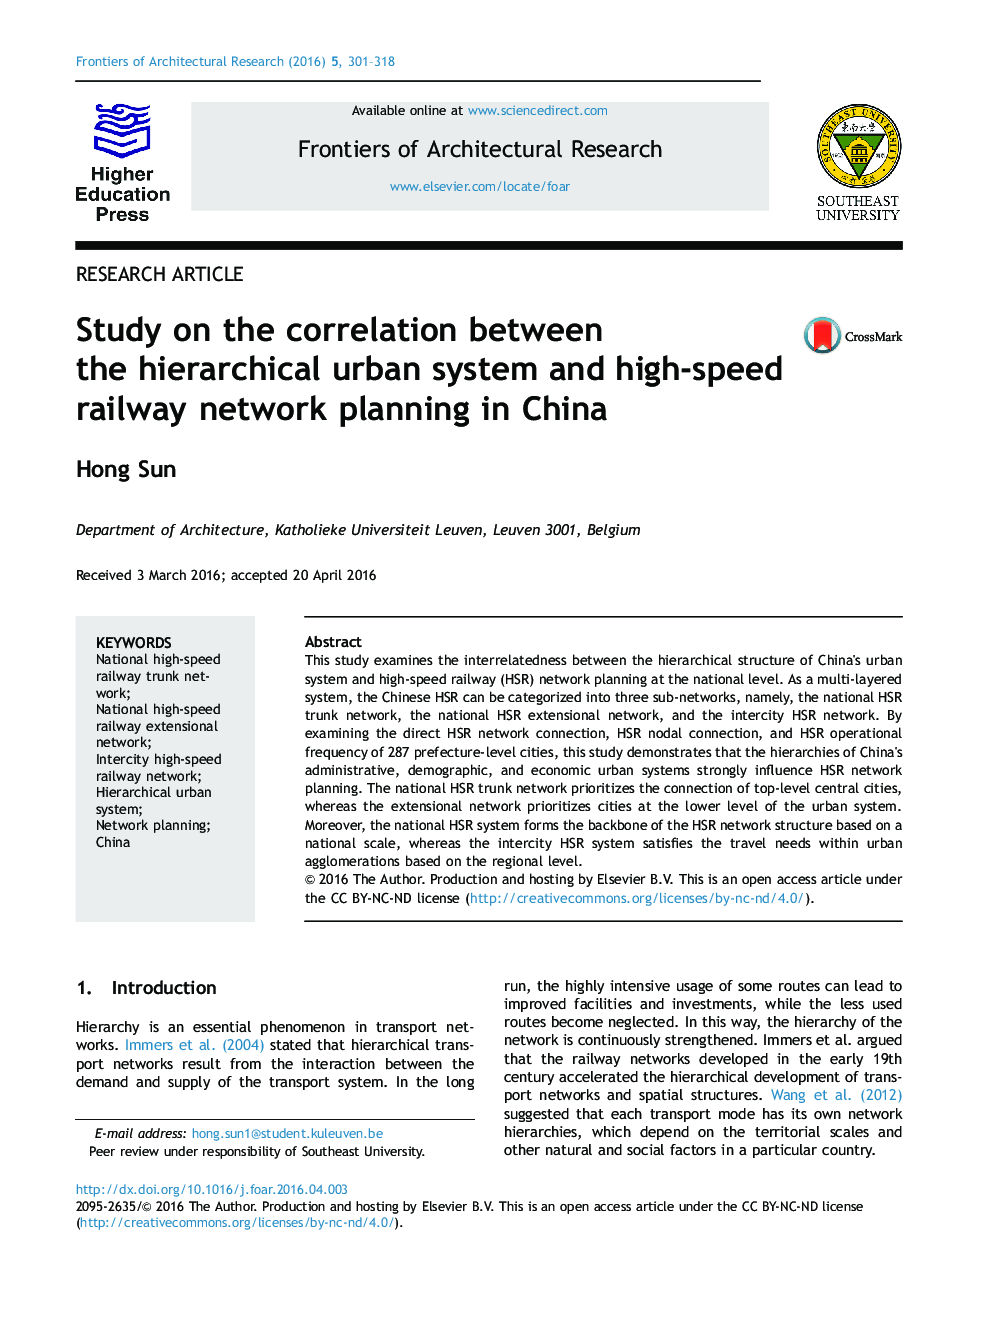 Study on the correlation between the hierarchical urban system and high-speed railway network planning in China